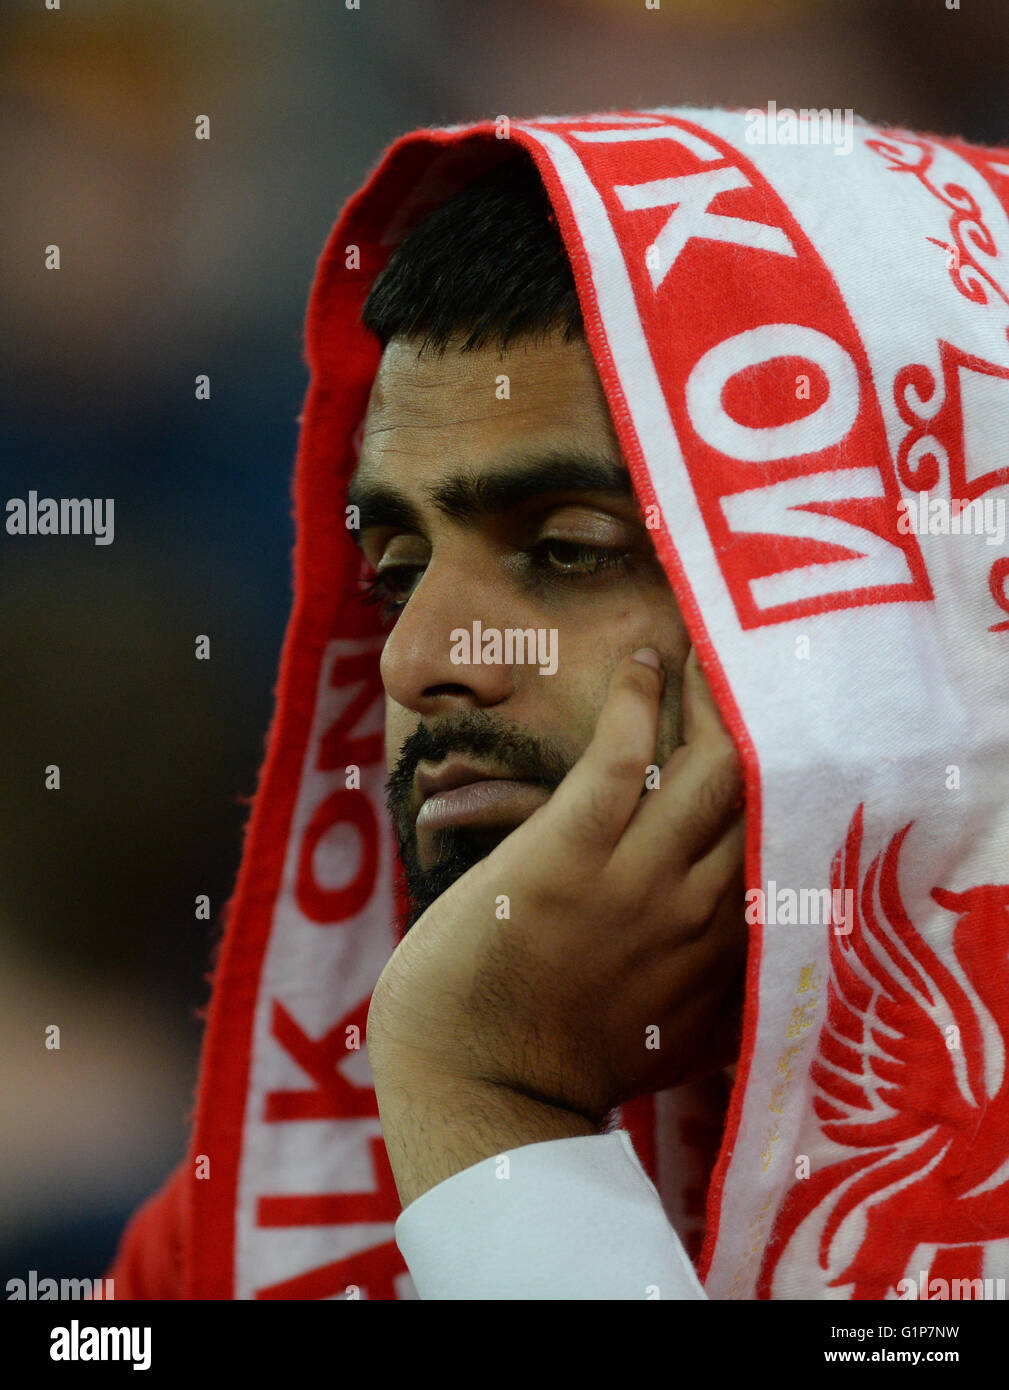 Basel, Switzerland. 18th May, 2016. Liverpool's supporter reacts during the UEFA Europa League final between Liverpool FC and Sevilla Futbol Club at the St. Jakob-Park stadium in Basel, Switzerland, on 18 May 2016. Credit:  dpa picture alliance/Alamy Live News Stock Photo